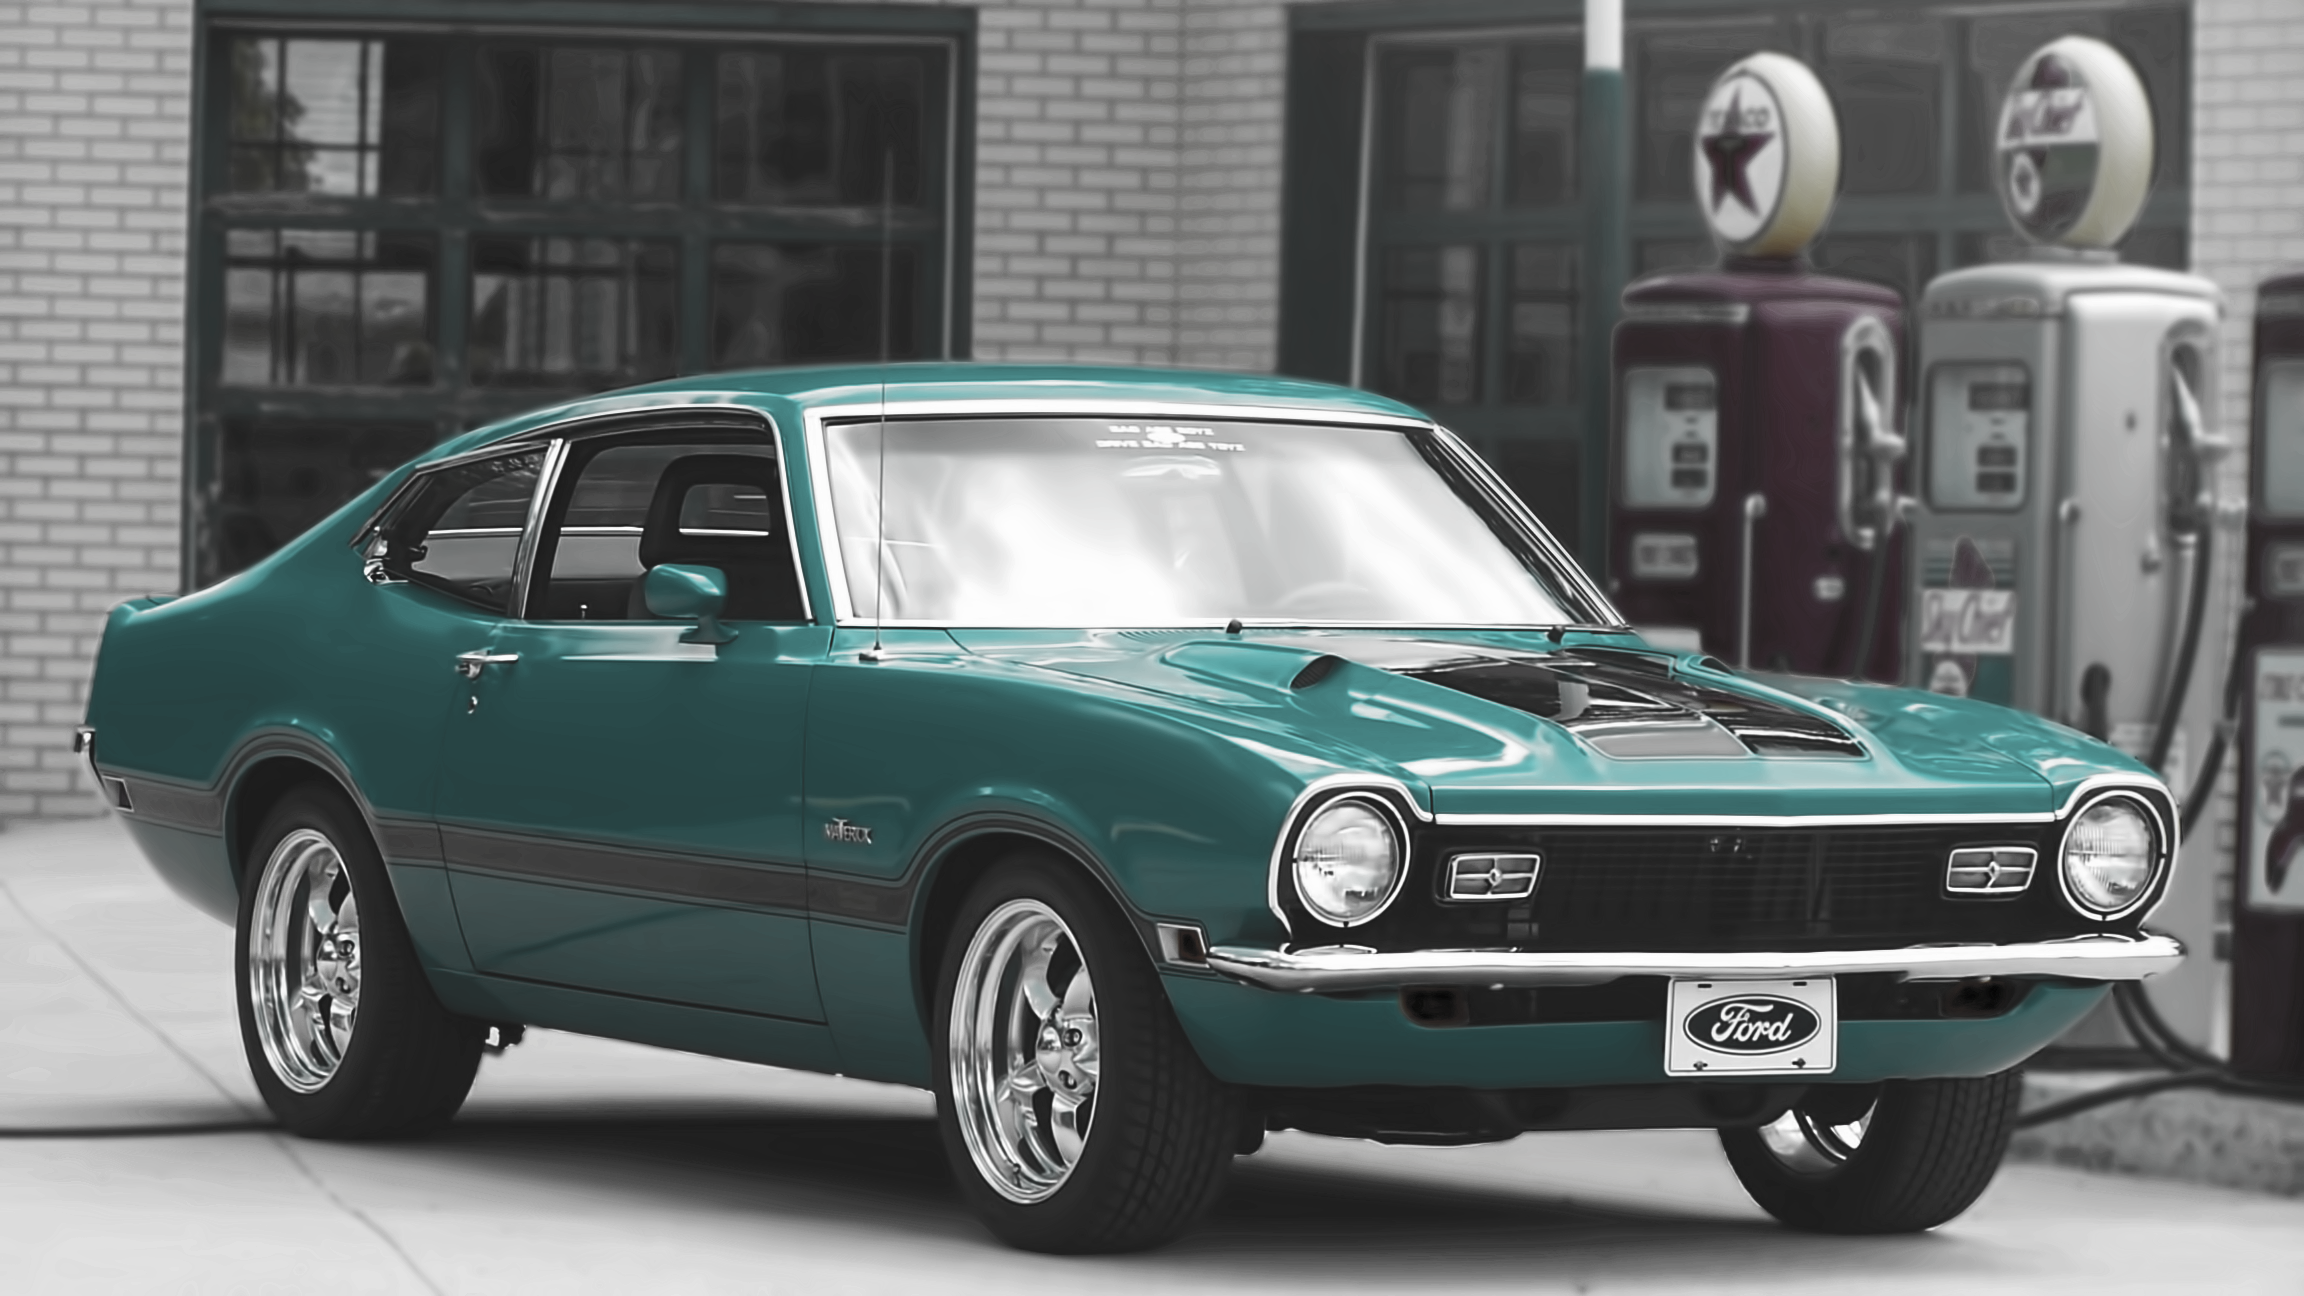 General 2304x1296 vehicle Ford Ford Maverick gas station muscle cars car Cyan Cars American cars